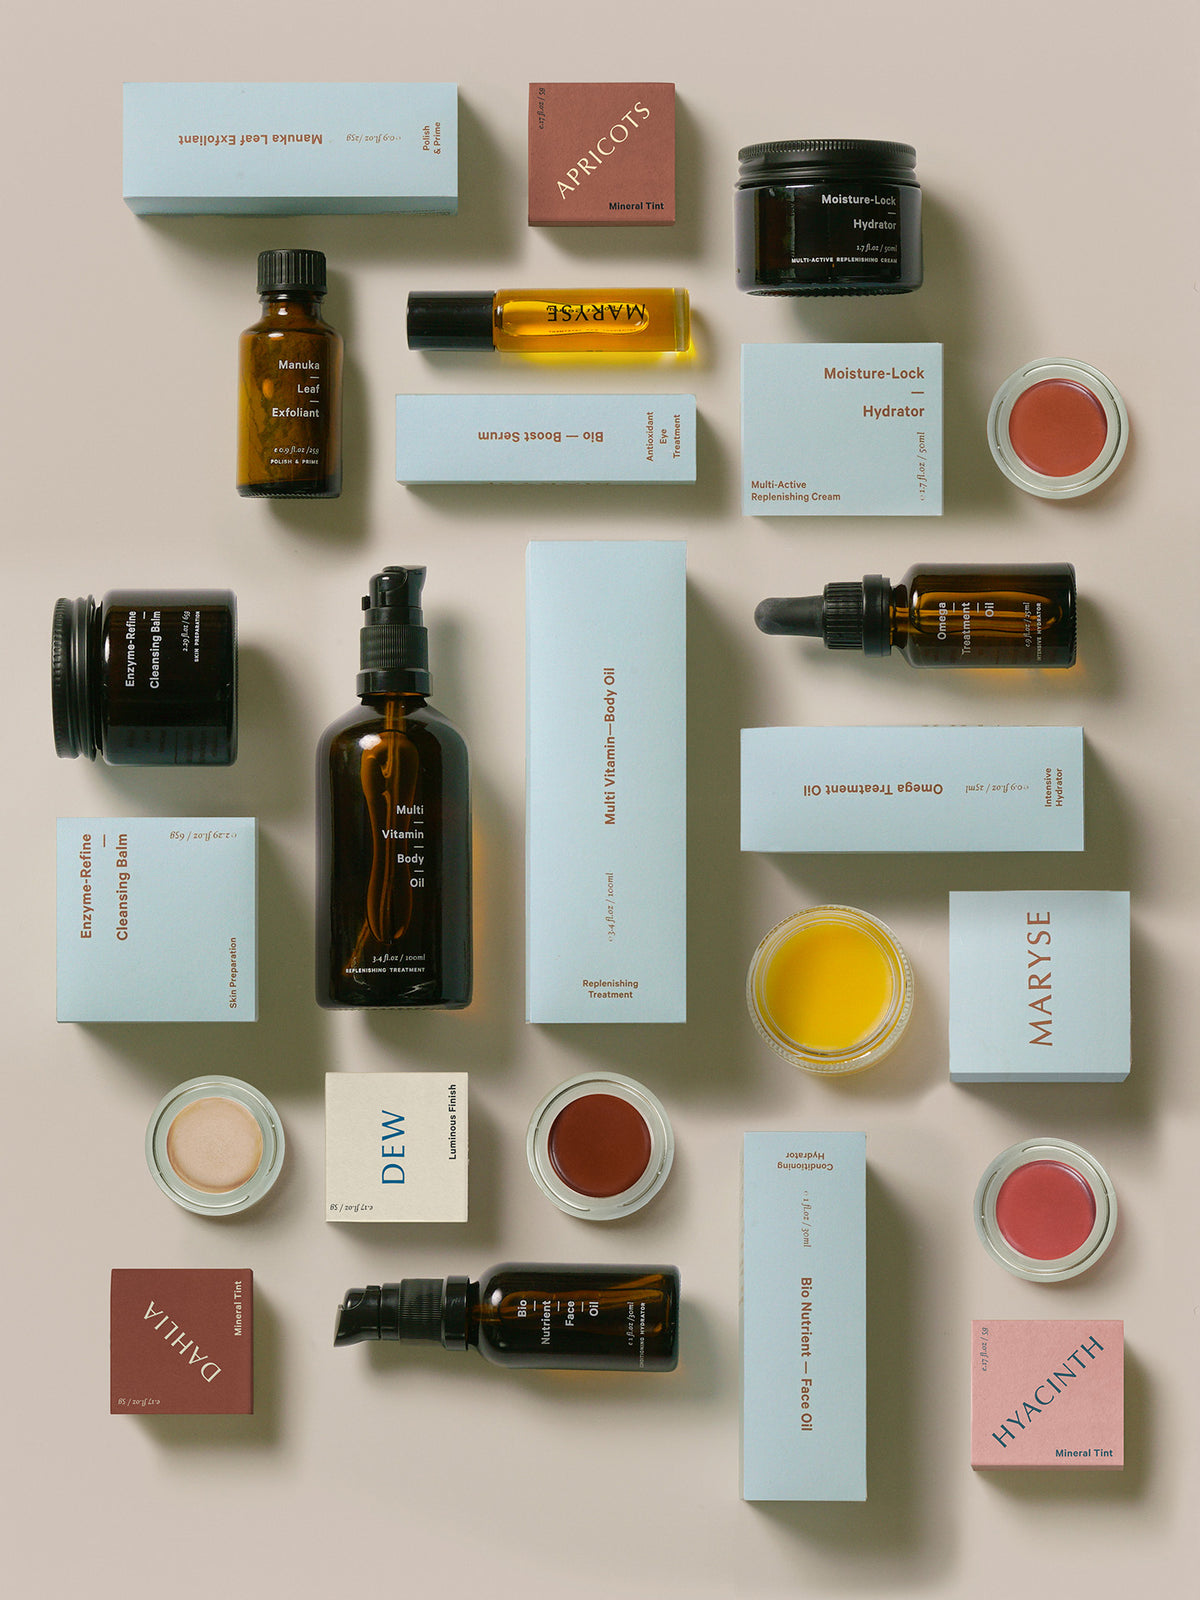 A collection of MARYSE Bio-Boost – Serum products arranged on a white surface.